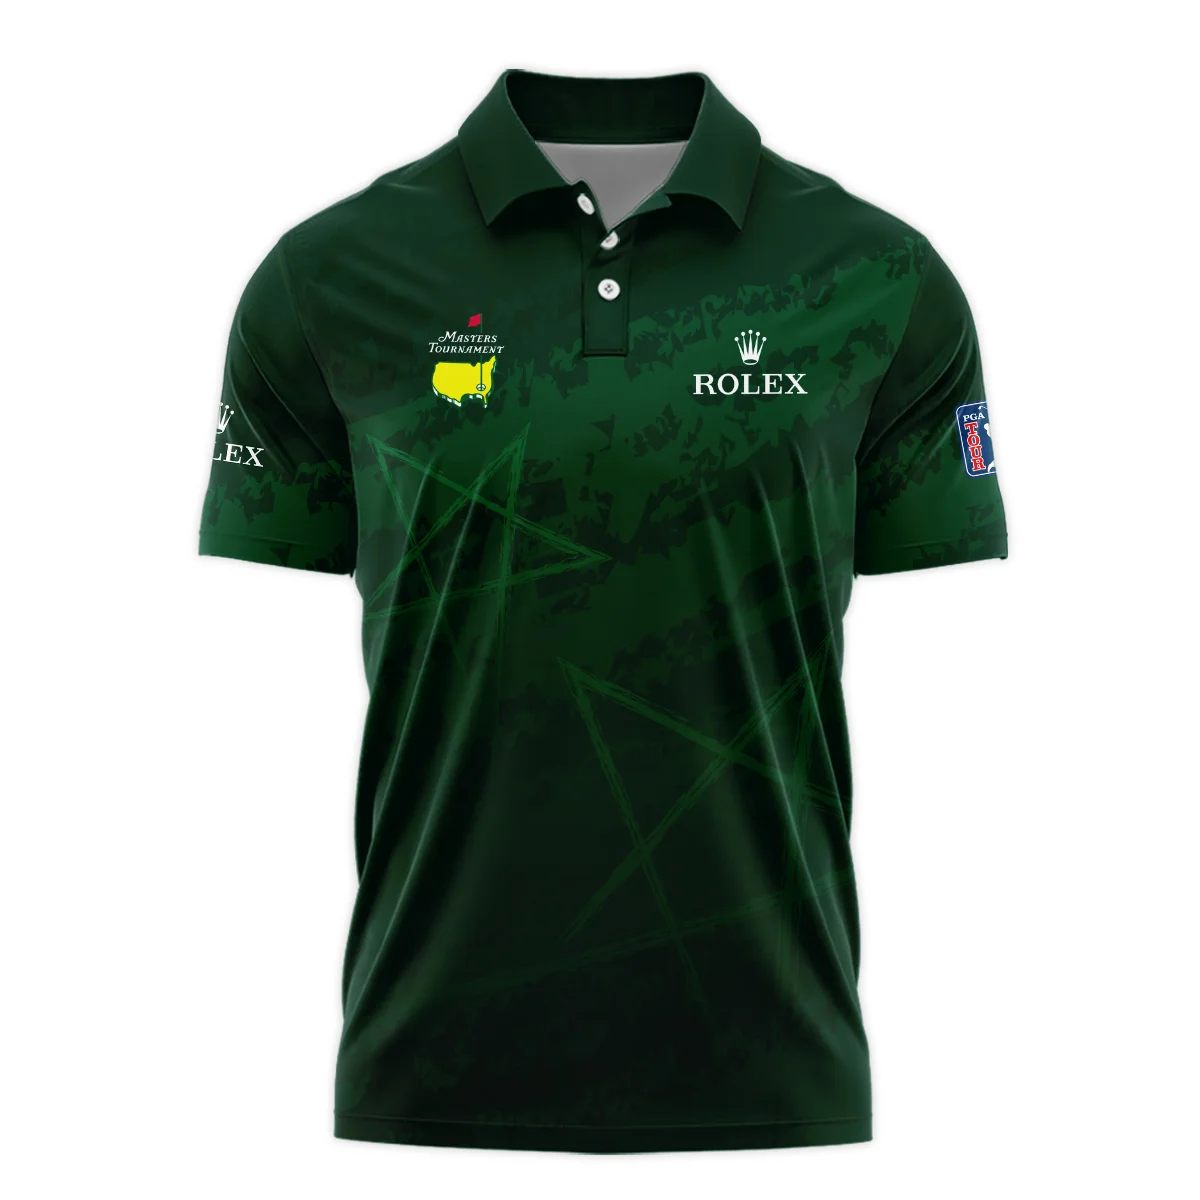 Stars Gradient Dark Green Grunge Pattern Masters Tournament Rolex Polo Shirt Style Classic Polo Shirt For Men